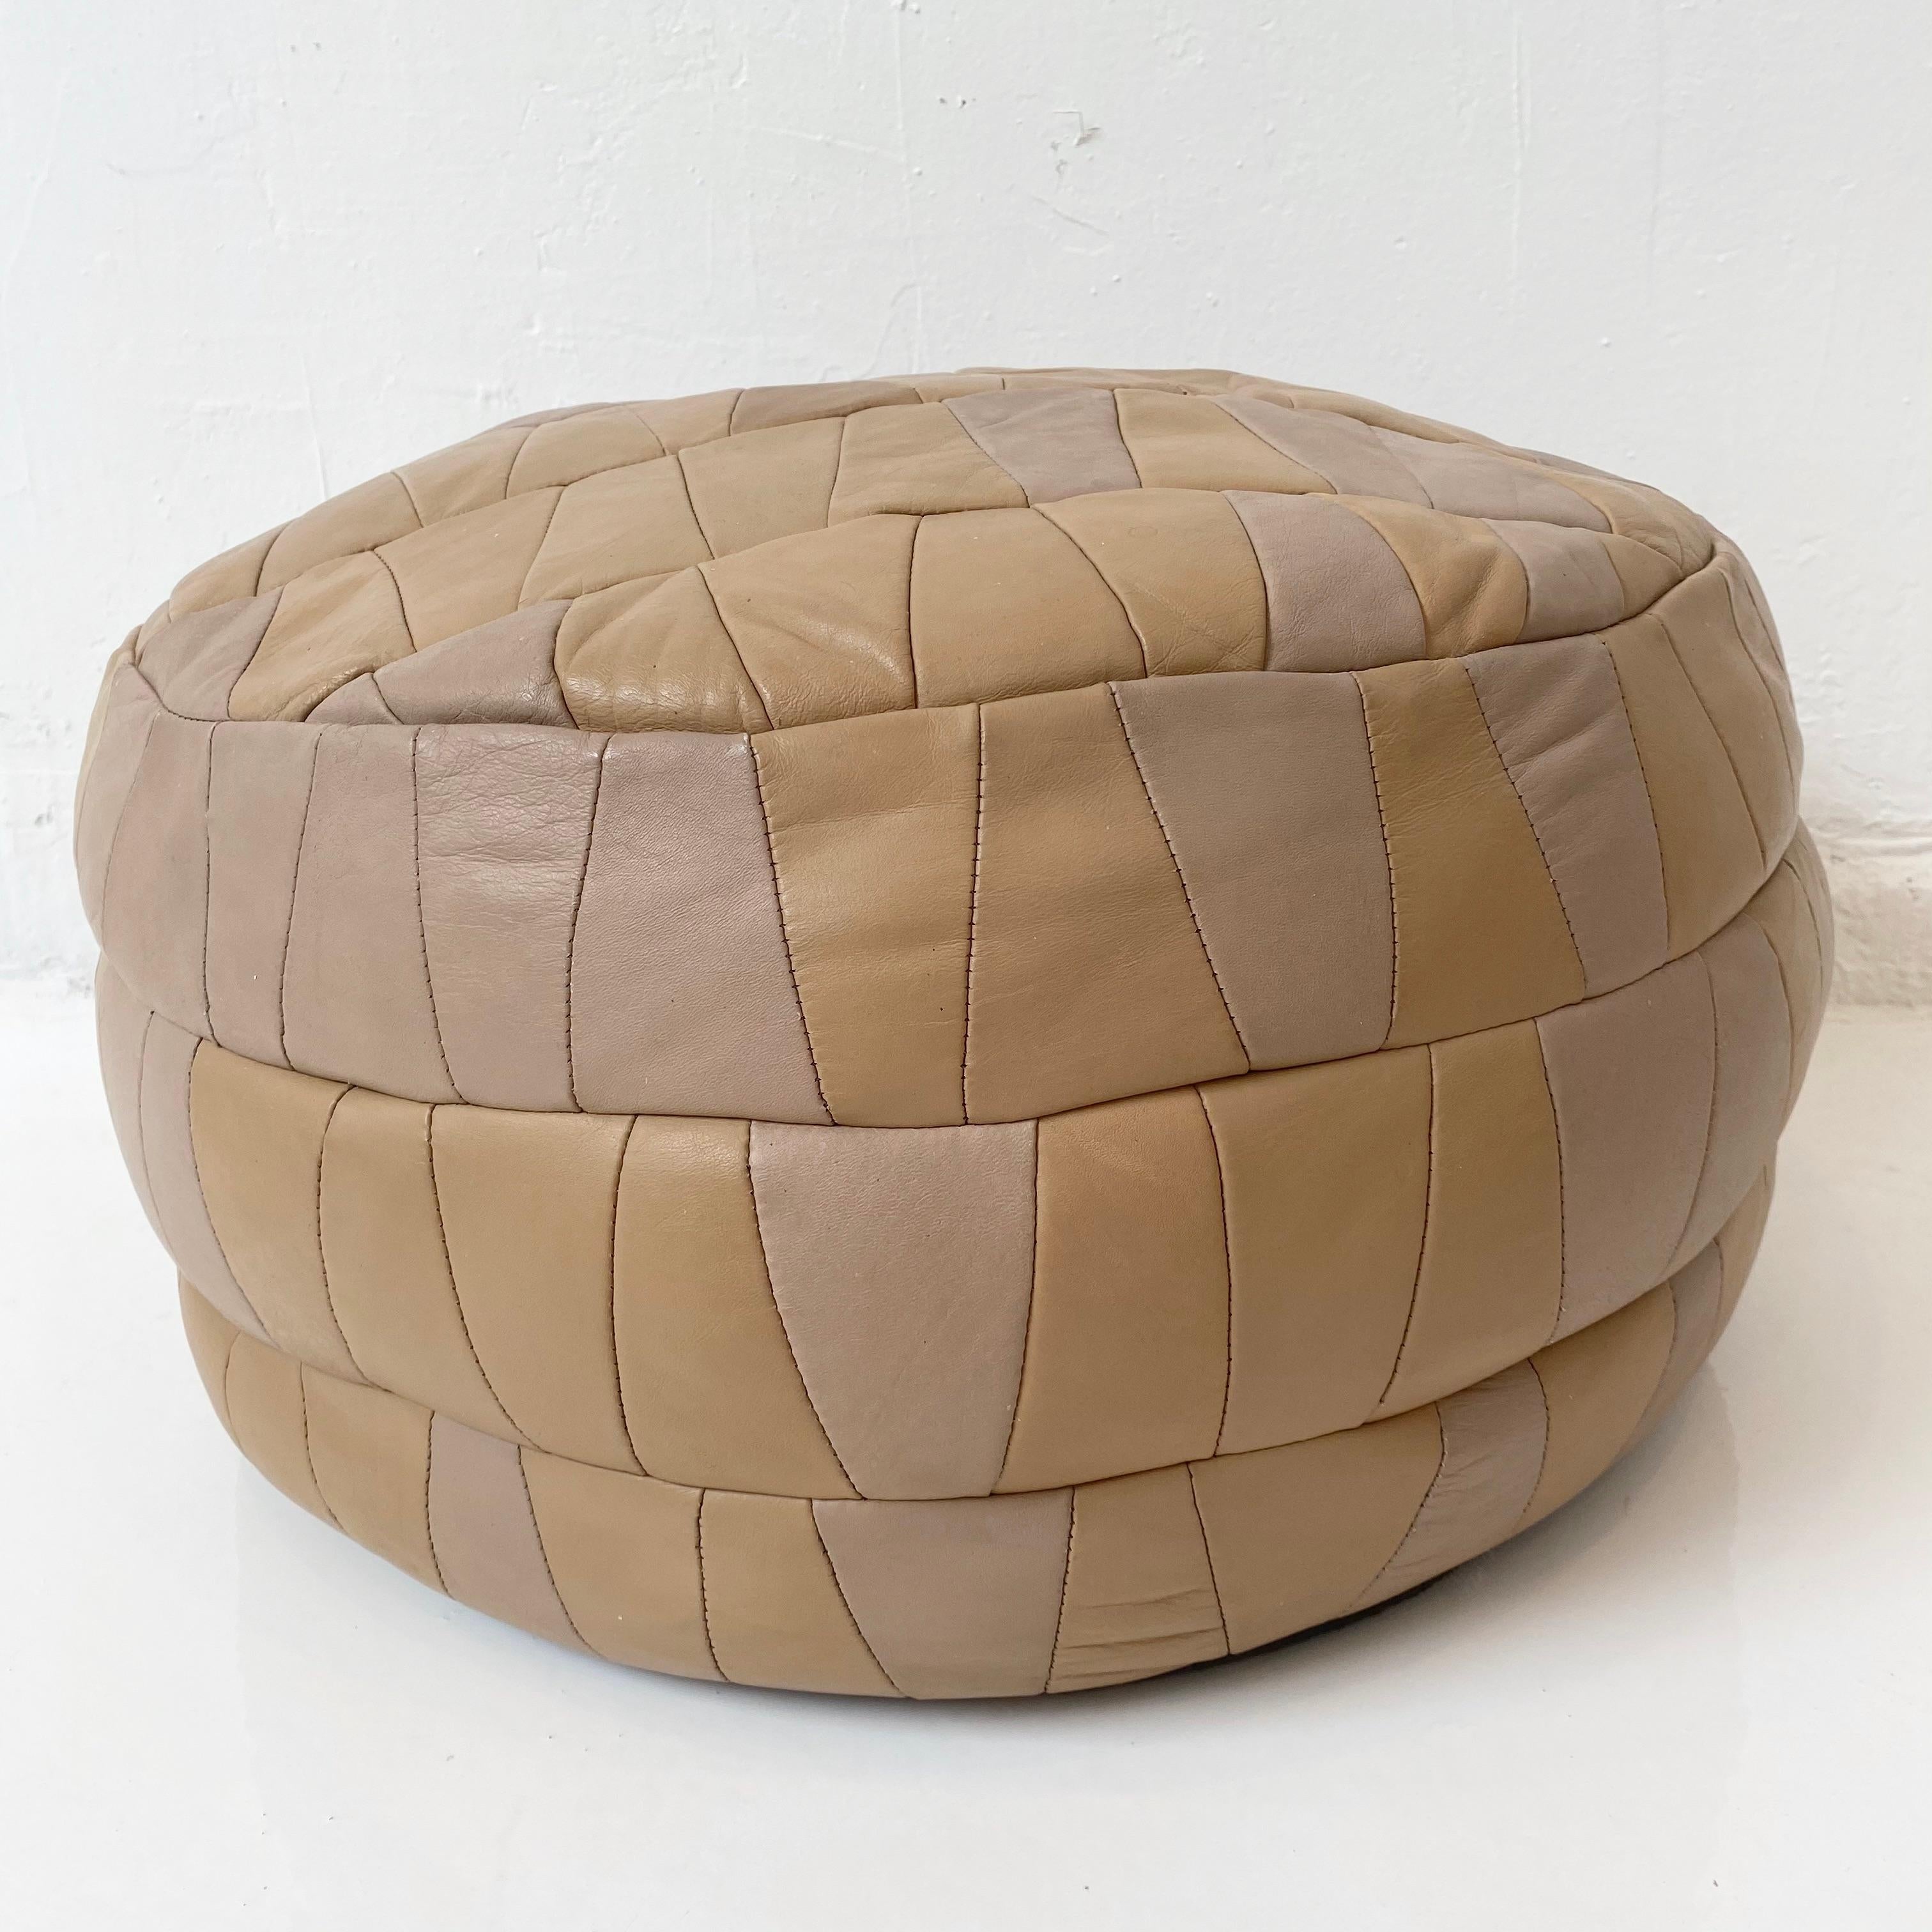 Unique peach colored leather pouf by Swiss designer De Sede with triangular patchwork. Perfect accent piece. Good vintage condition. 

